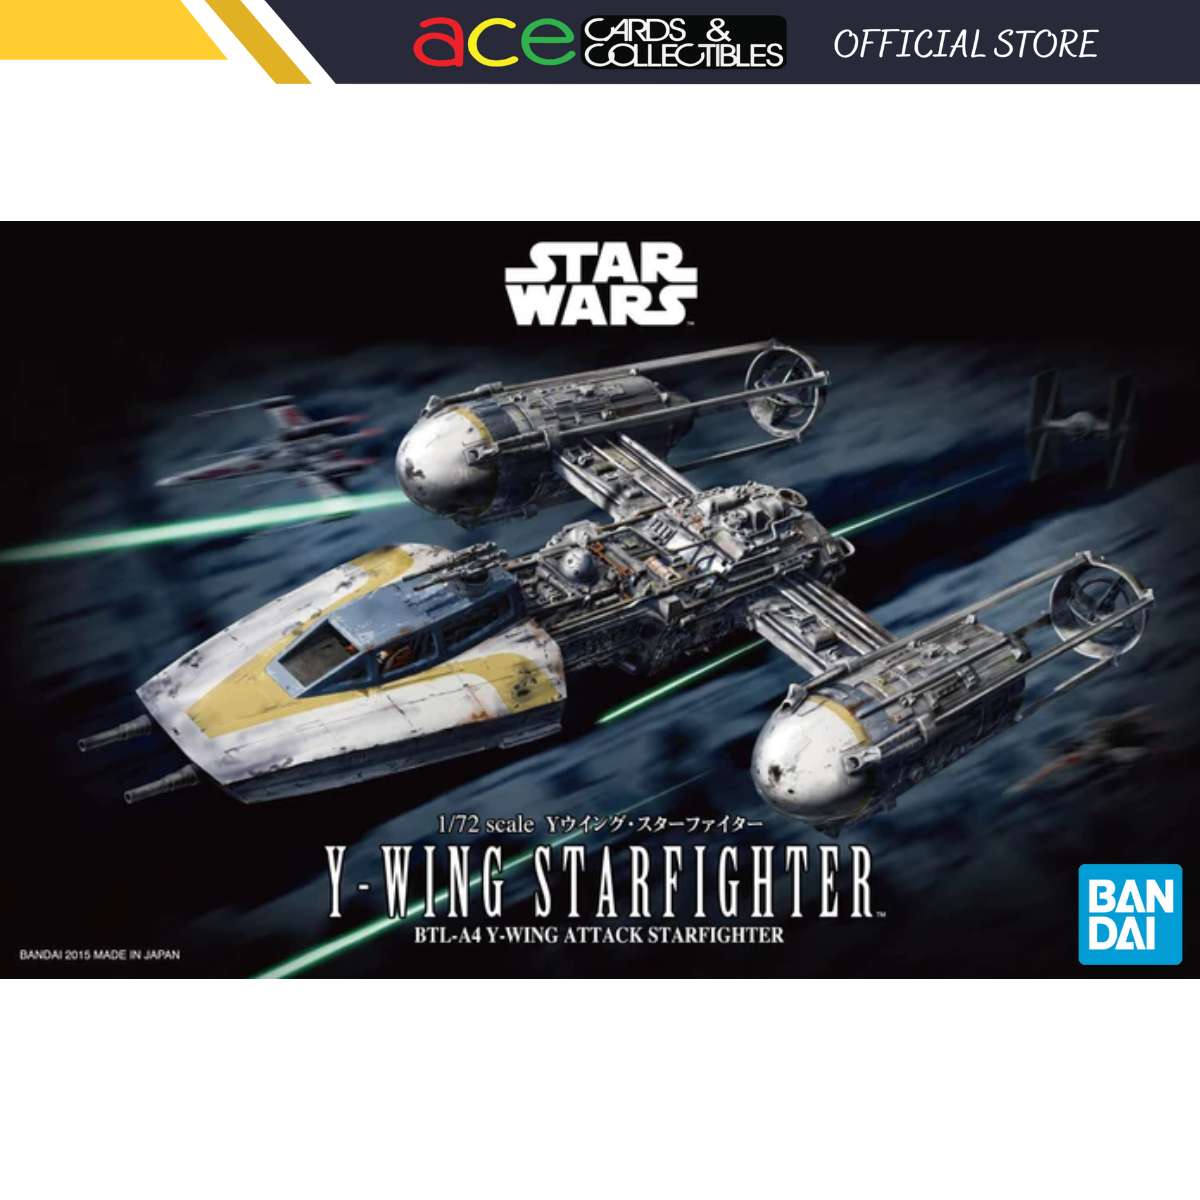 Star Wars Vehicle Model 1/72 Y-Wing Starfighter-Bandai-Ace Cards & Collectibles